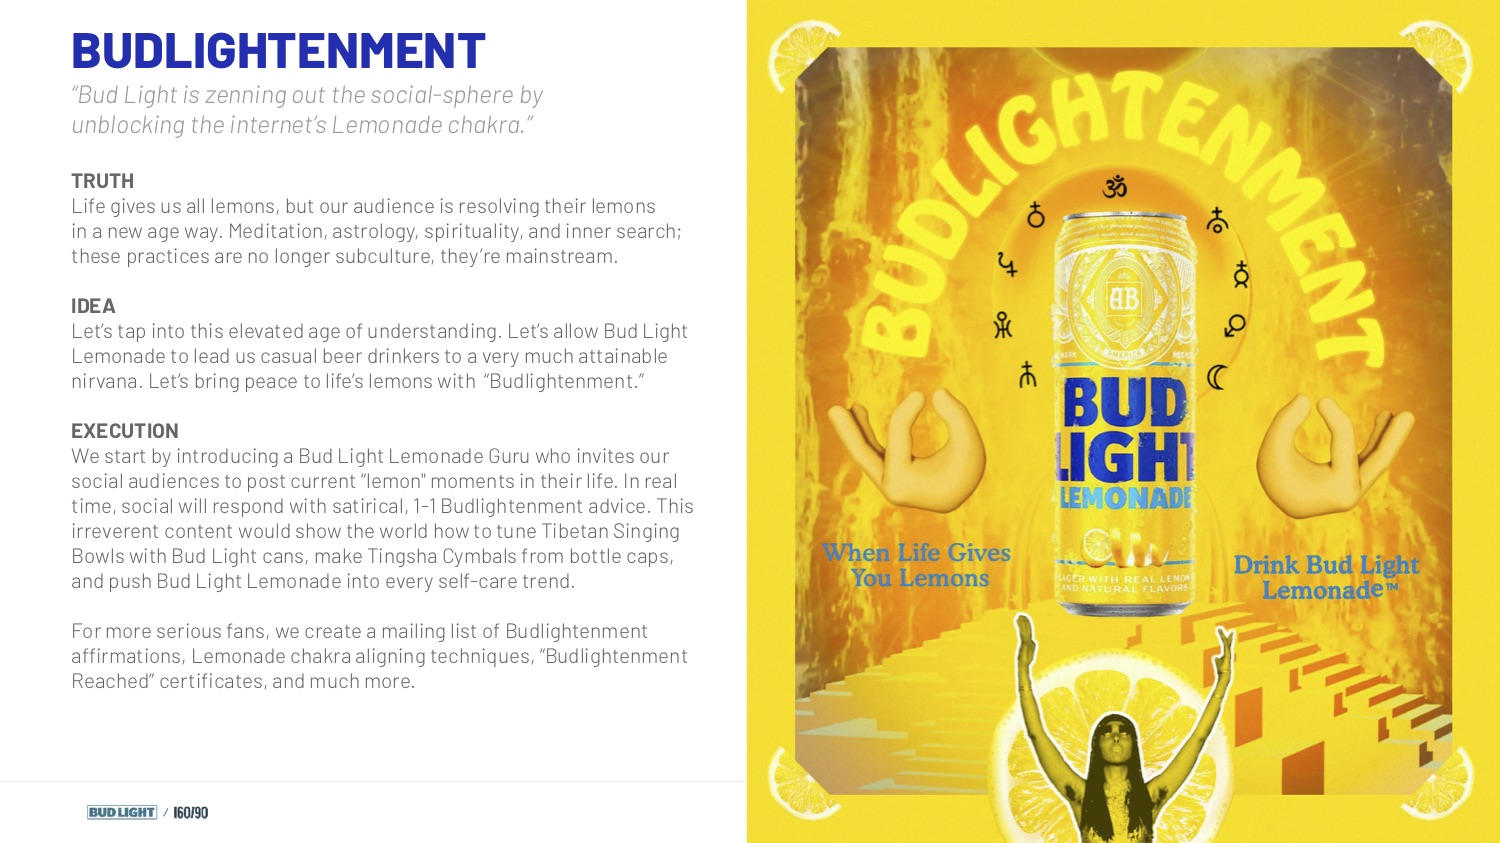 Pitch: Budlightenment